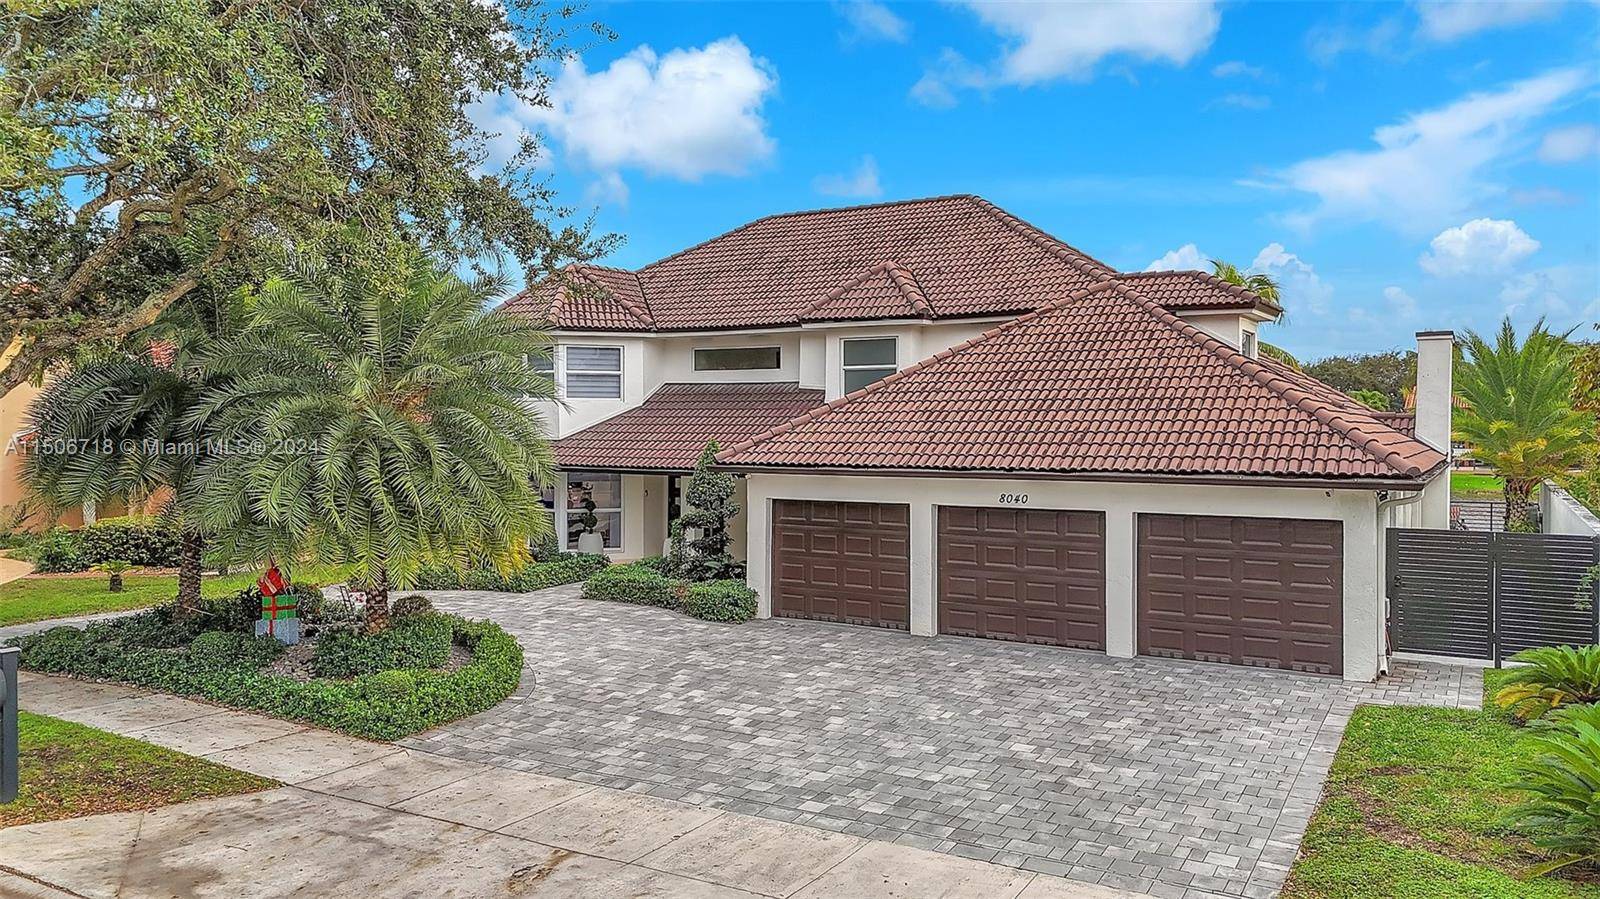 Welcome to this beauty in the heart of Miami Lakes Royal Oaks completely renovated with top of the line upgrades.